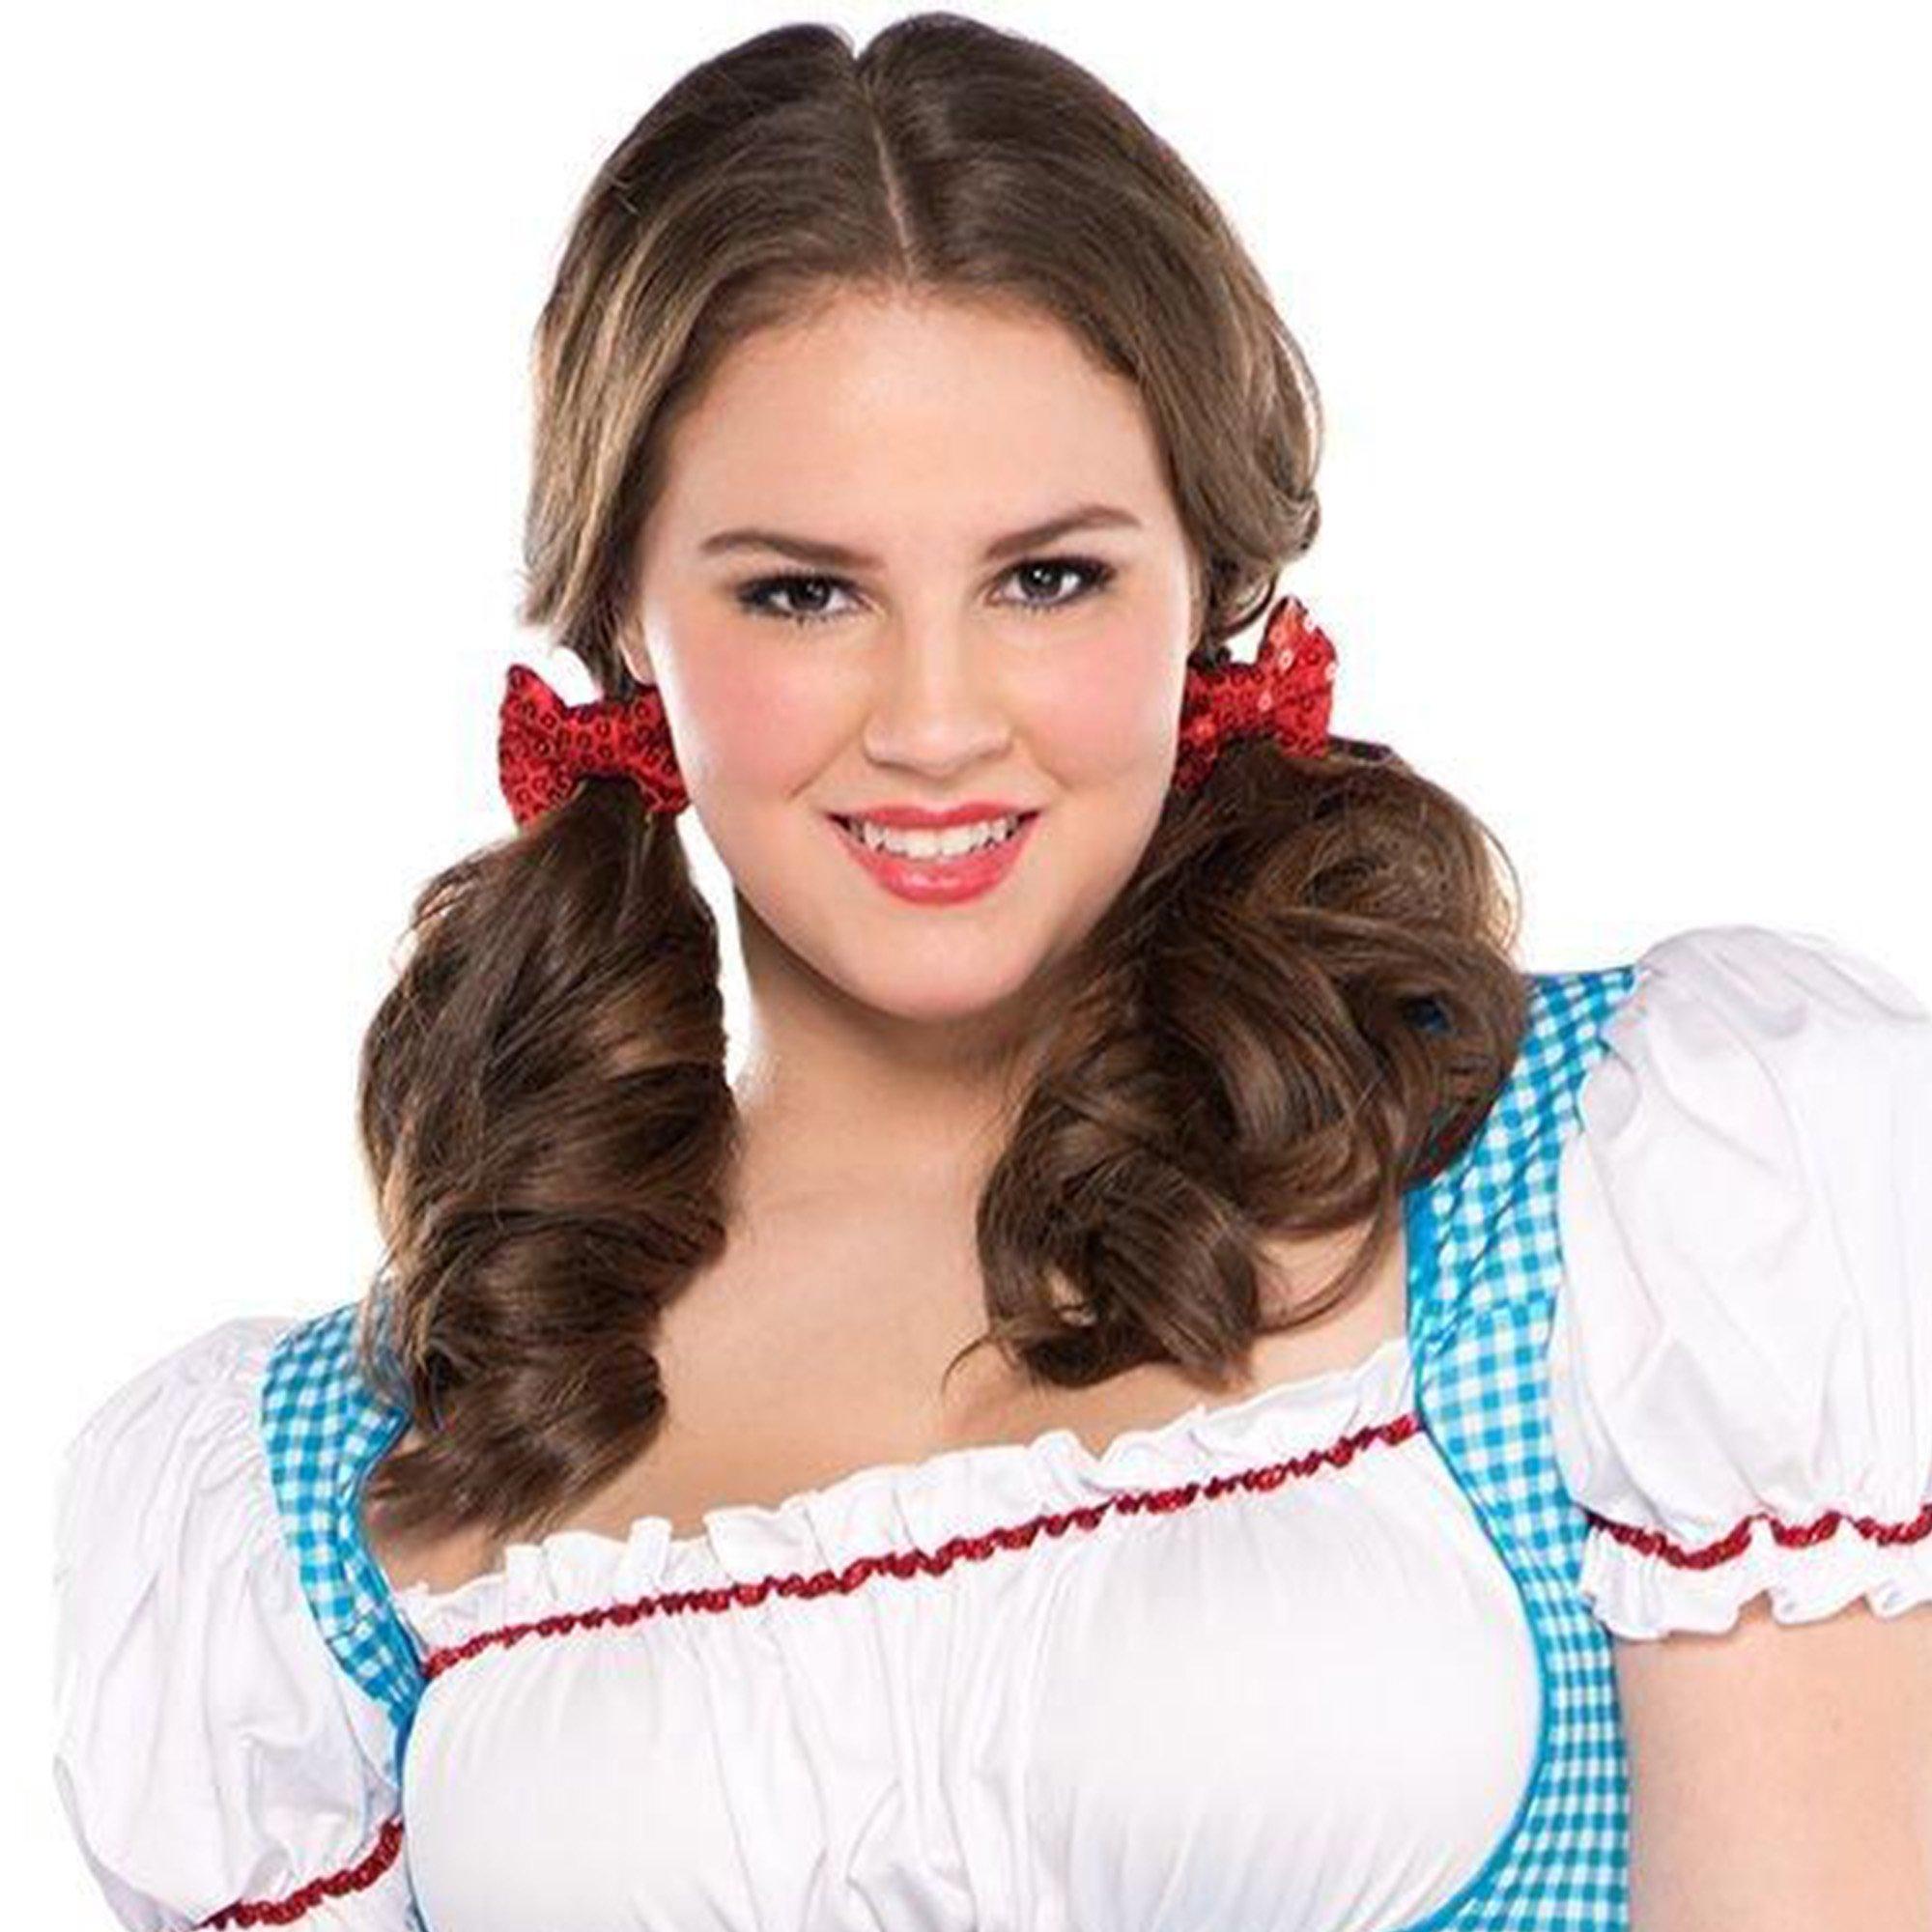 Adult Plus Size Dorothy Costume - The Wizard of Oz